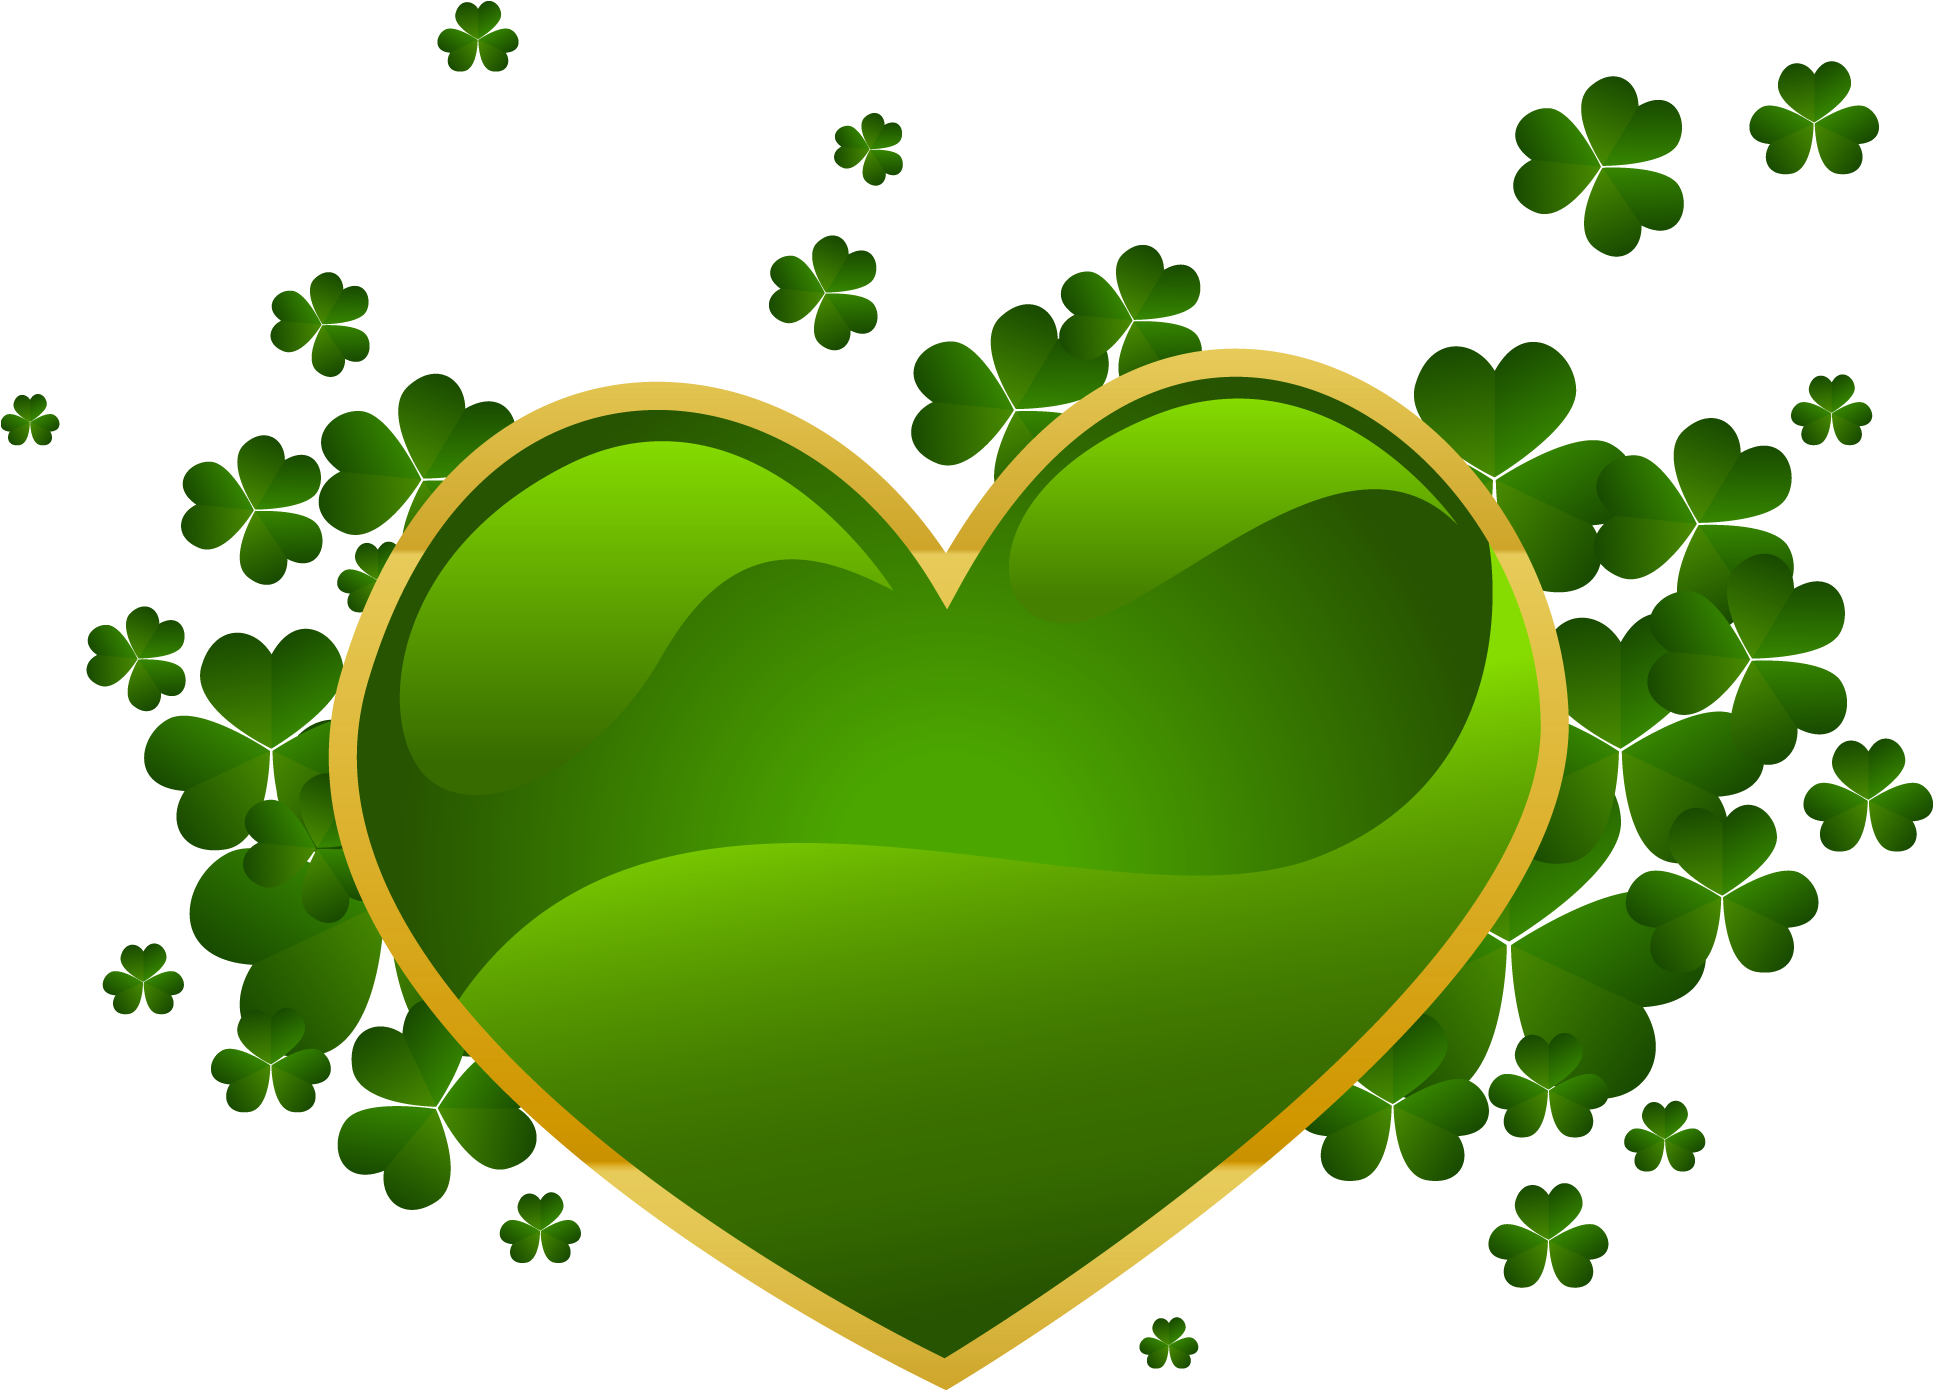 A Green Heart With Gold Border Surrounded By Clovers